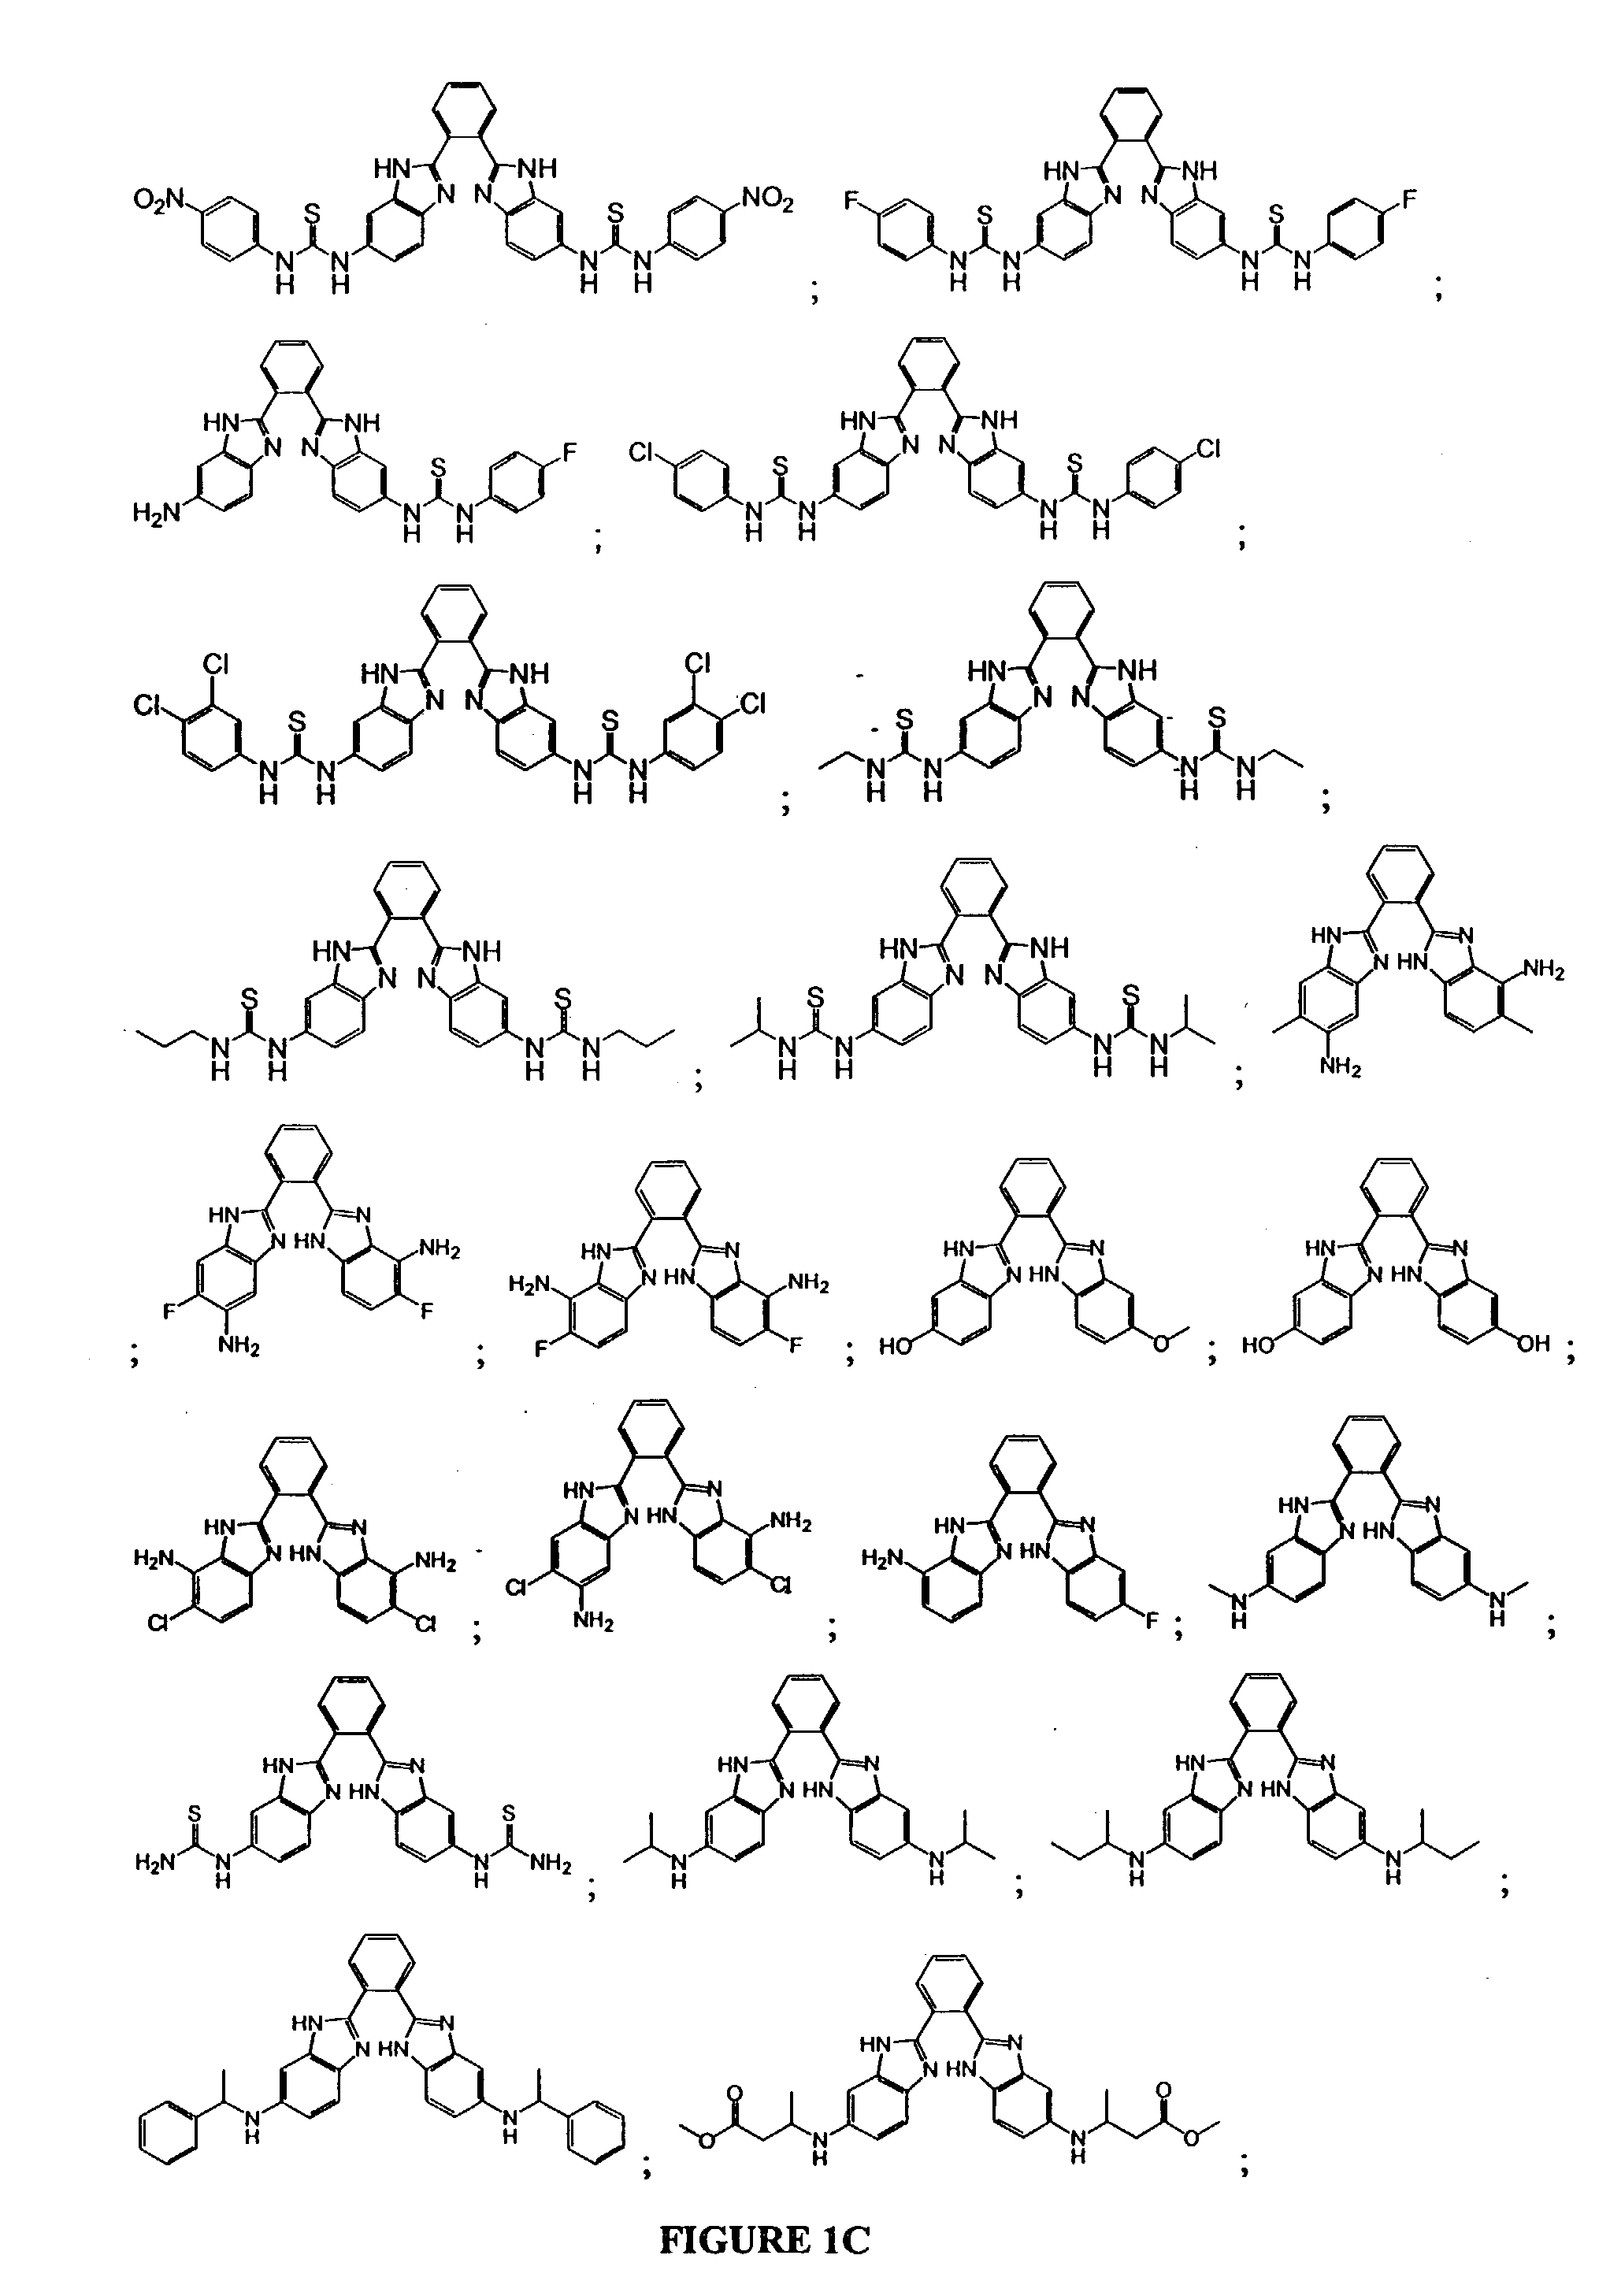 Bis-benzimidazoles and related compounds as potassium channel modulators